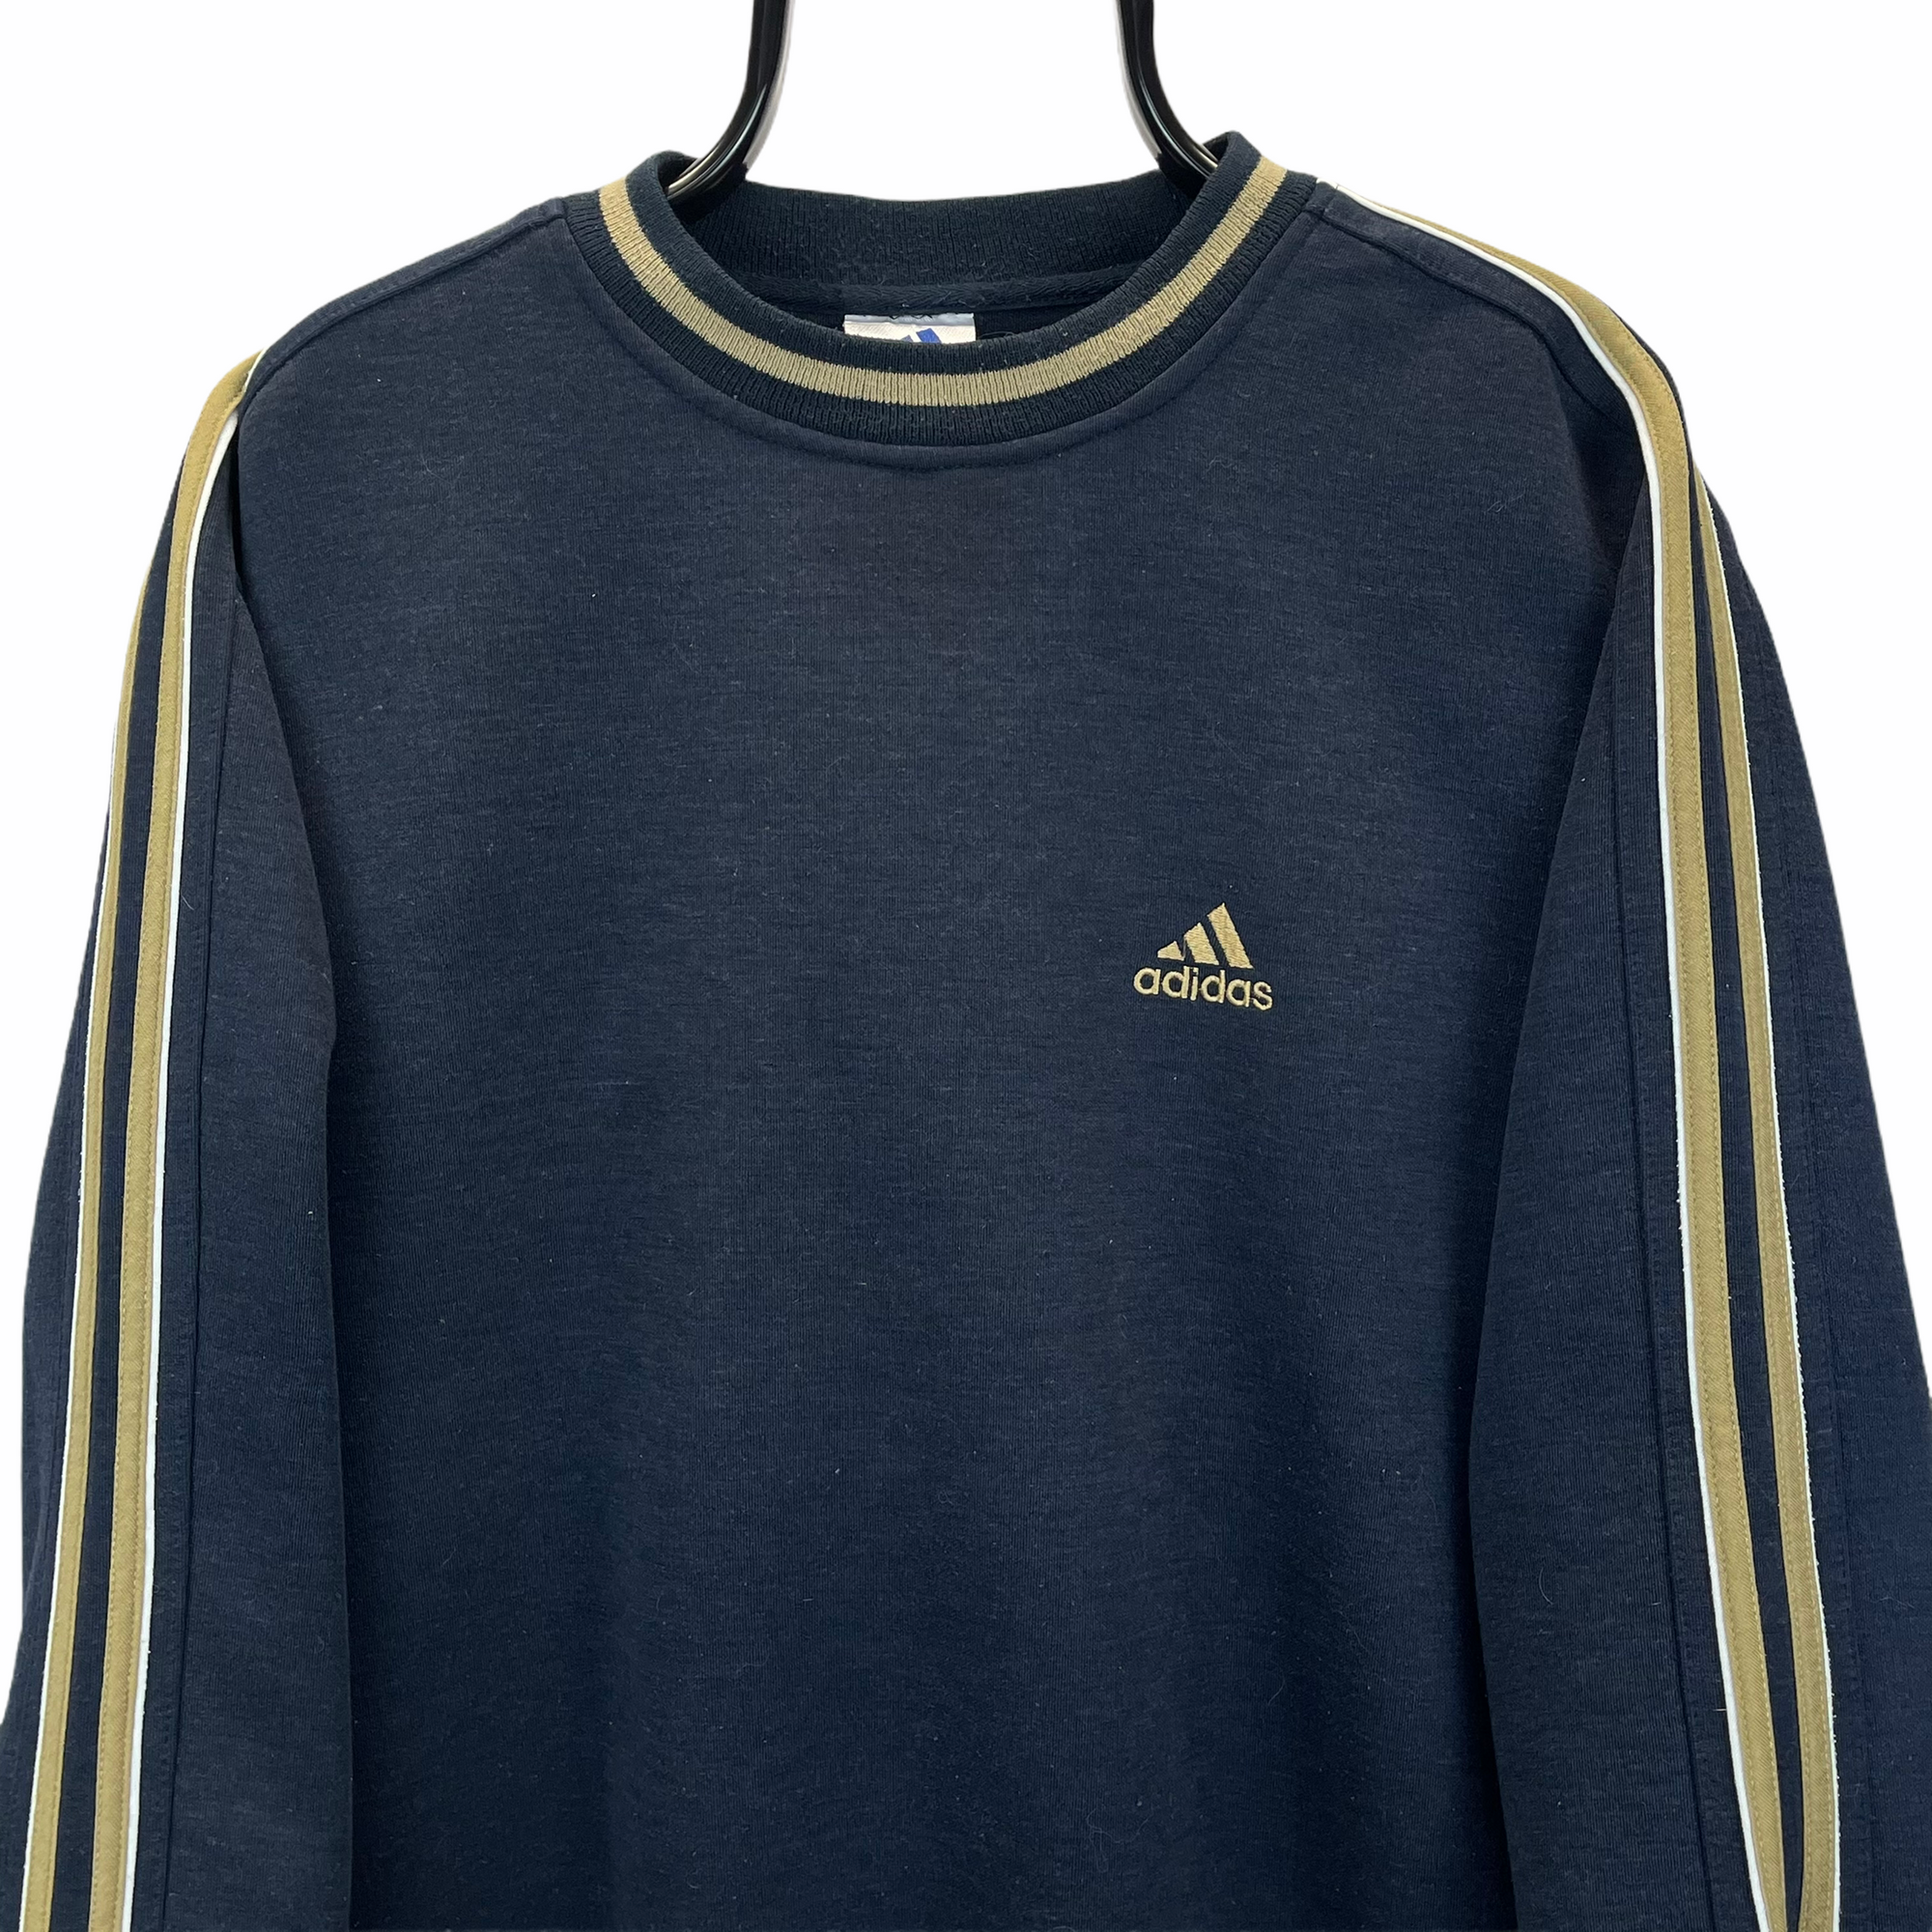 VINTAGE 90S ADIDAS EMBROIDERED SMALL LOGO SWEATSHIRT IN NAVY & GOLD - MEN'S LARGE/WOMEN'S XL